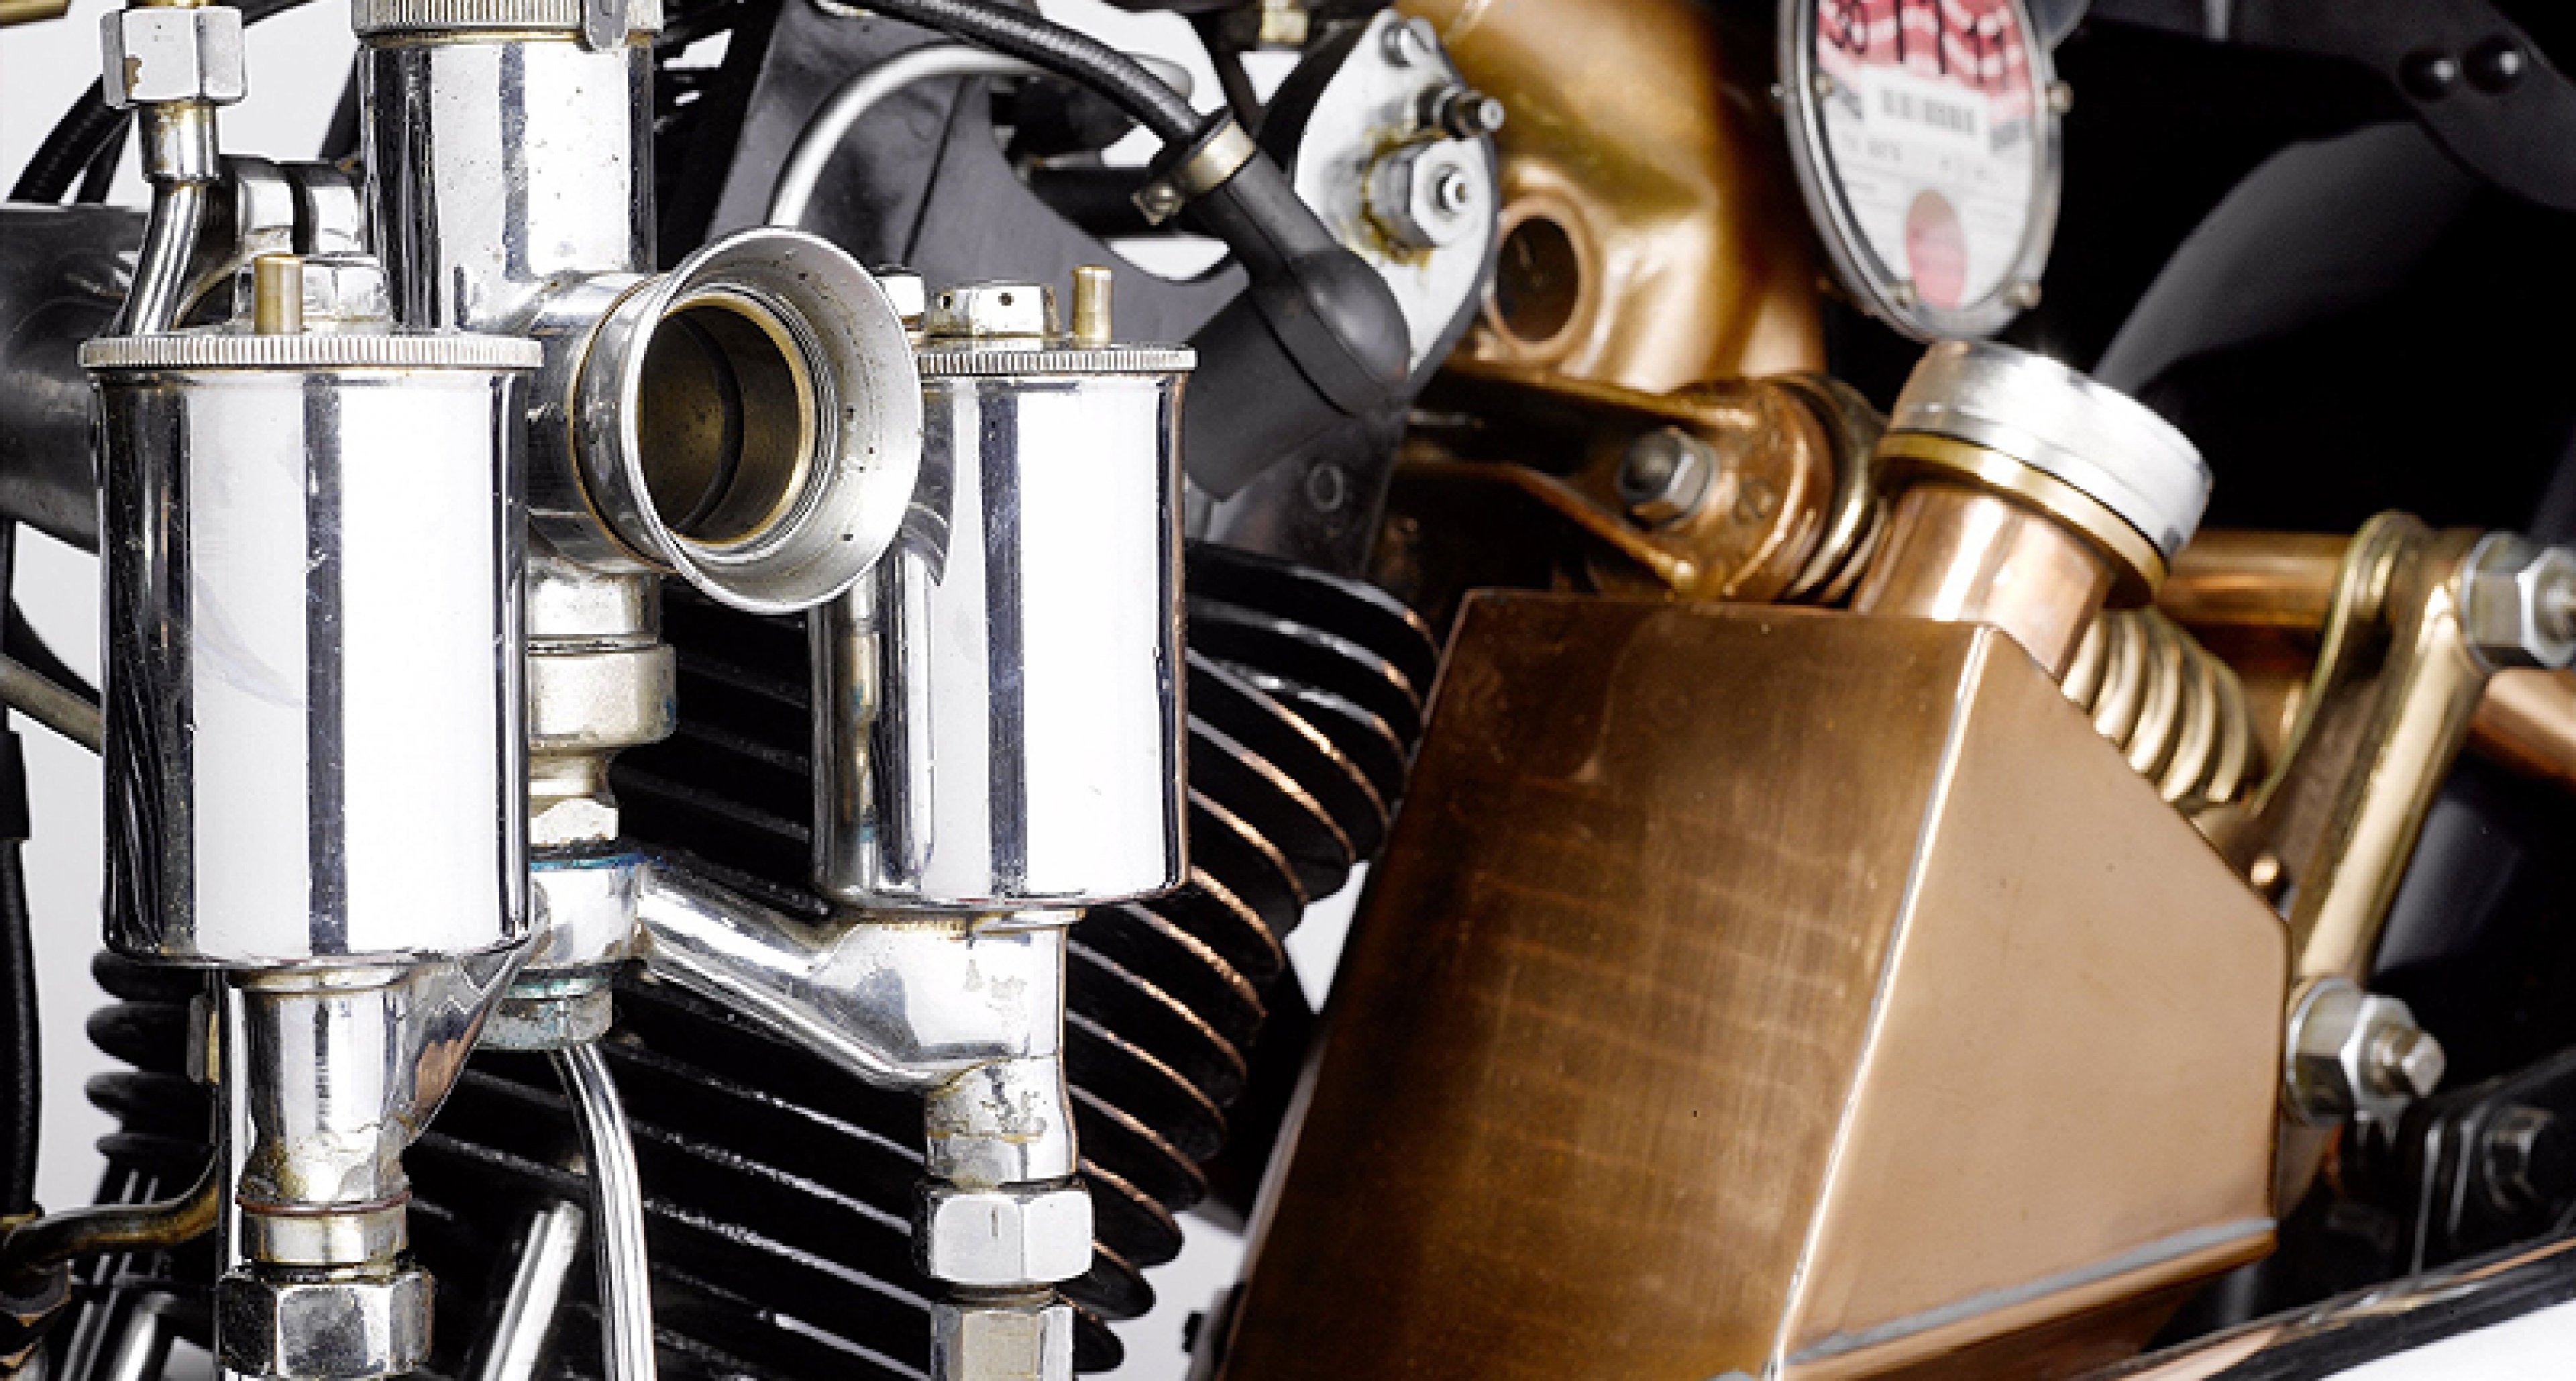 Brough Superior SS100 set to become world's most expensive motorcycle